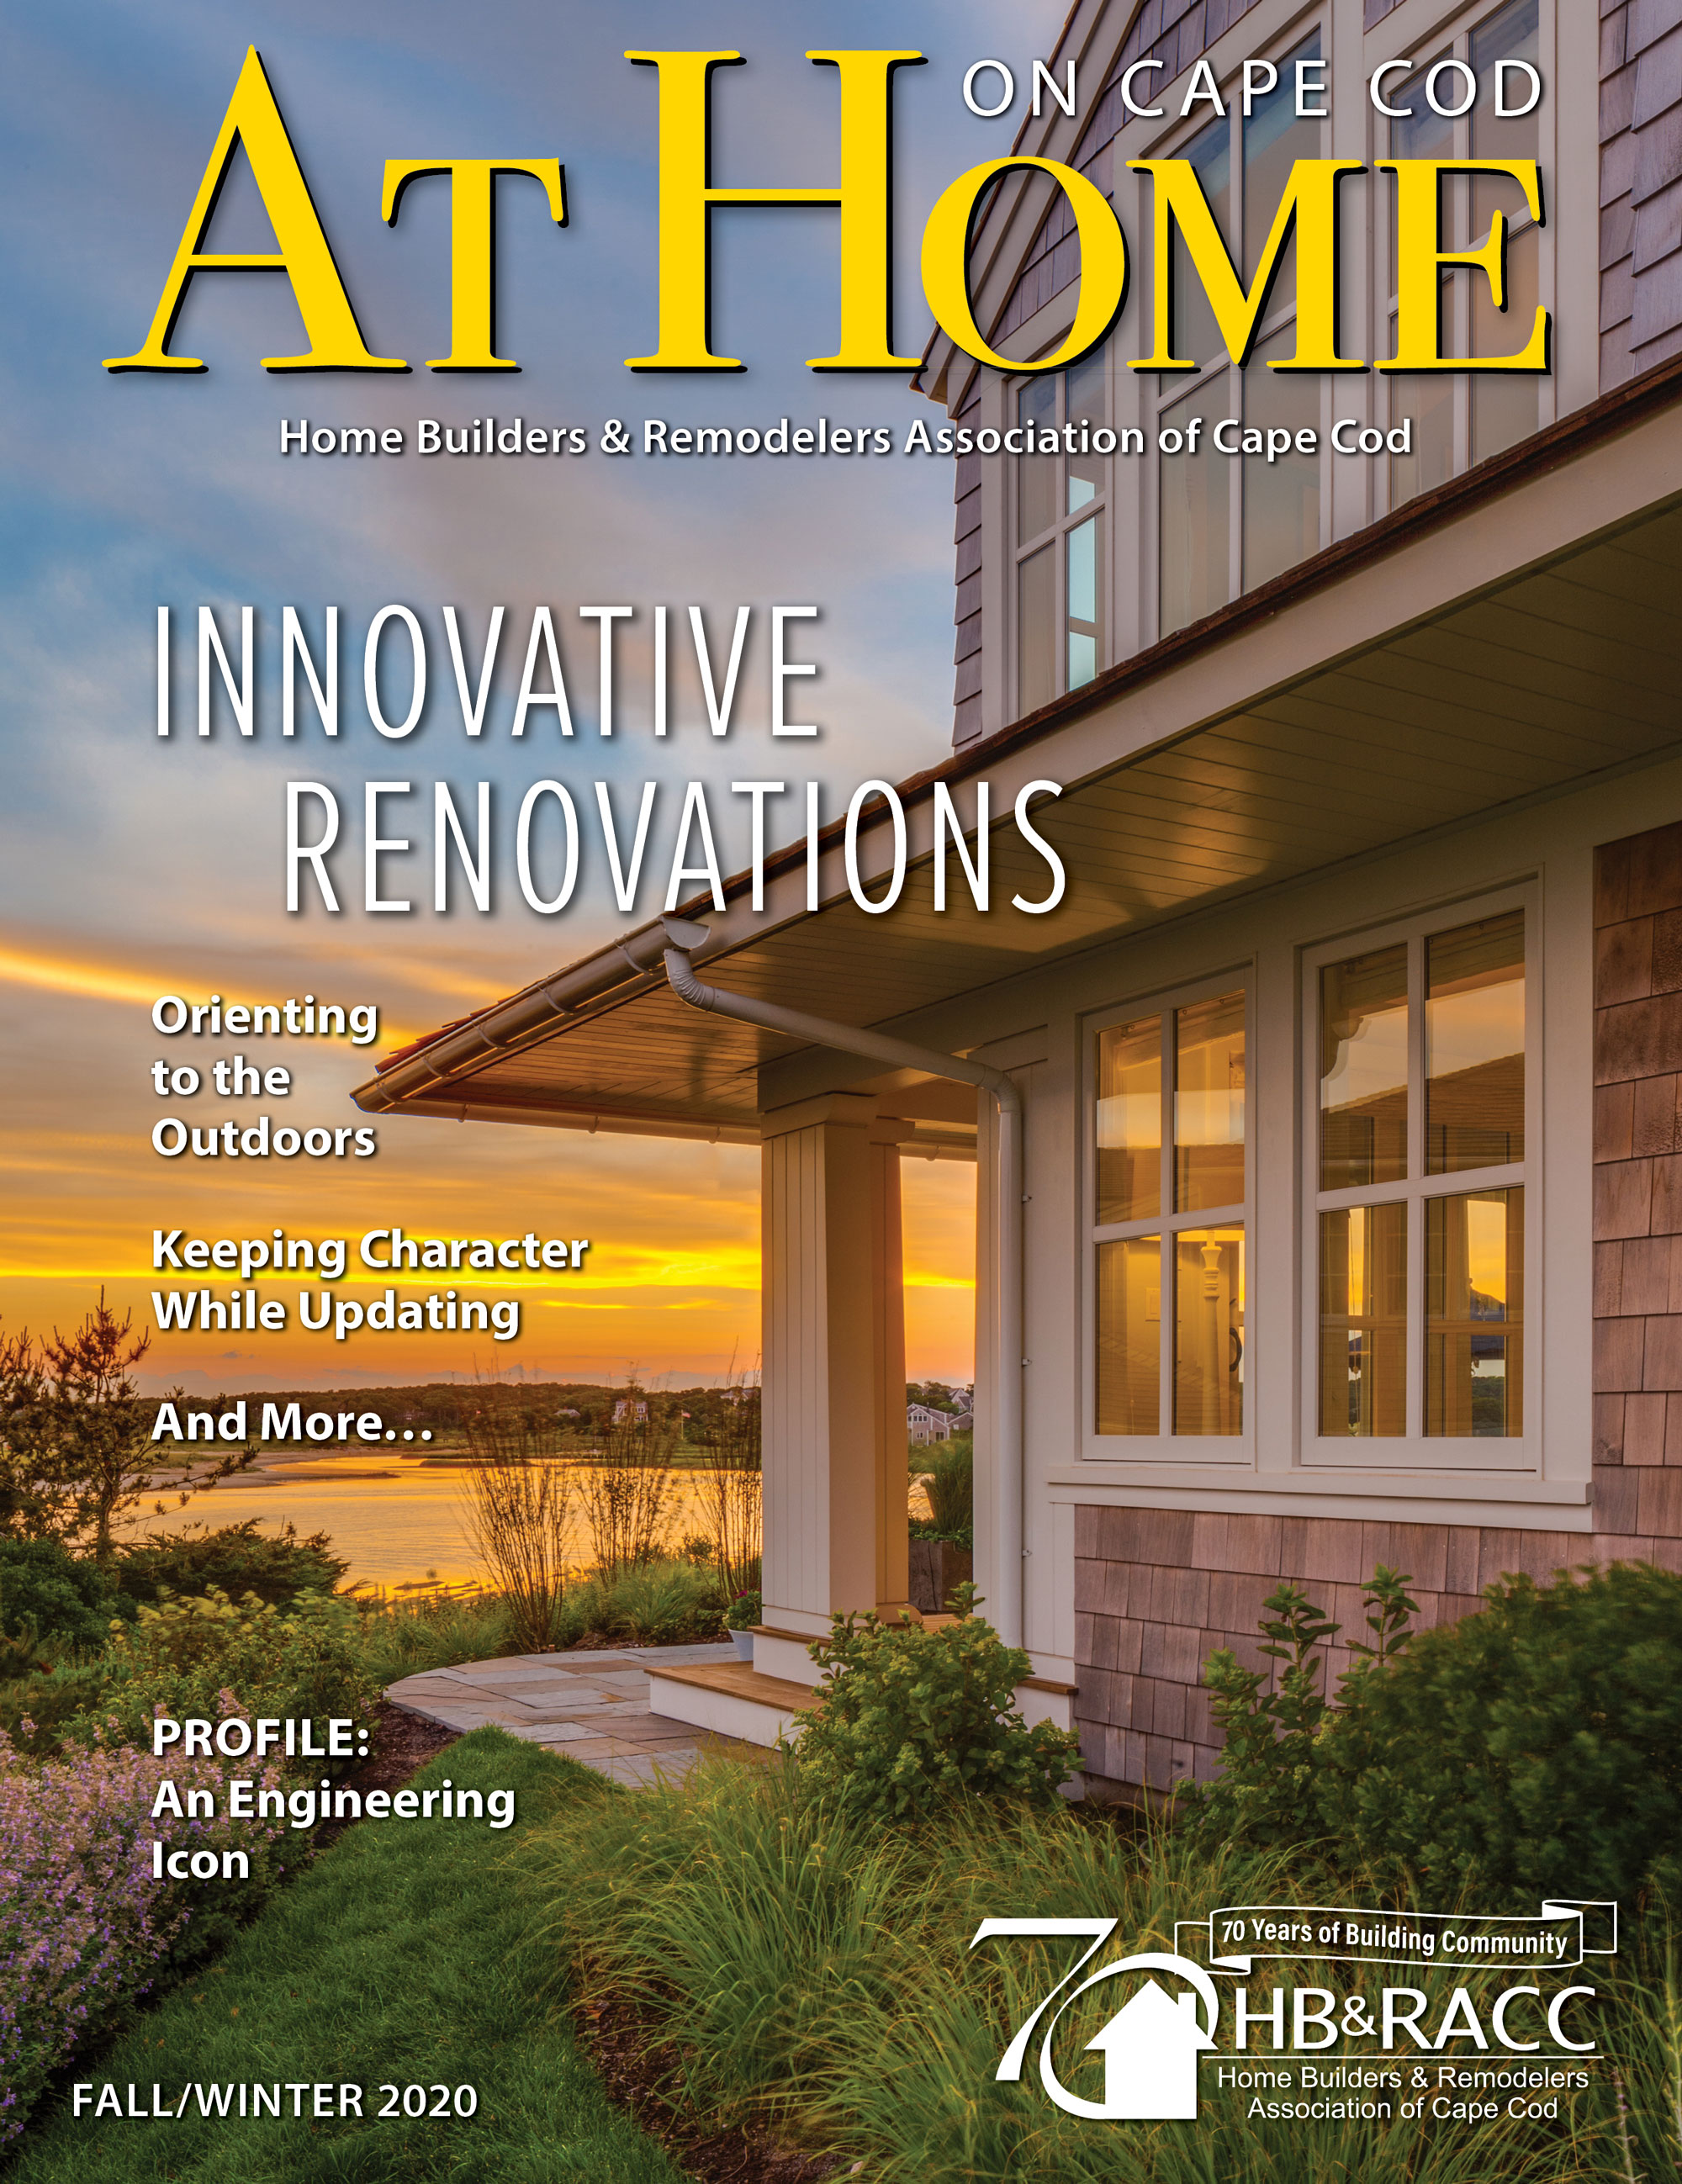 "At Home on Cape Cod" Magazine Home Builders & Remodelers Association